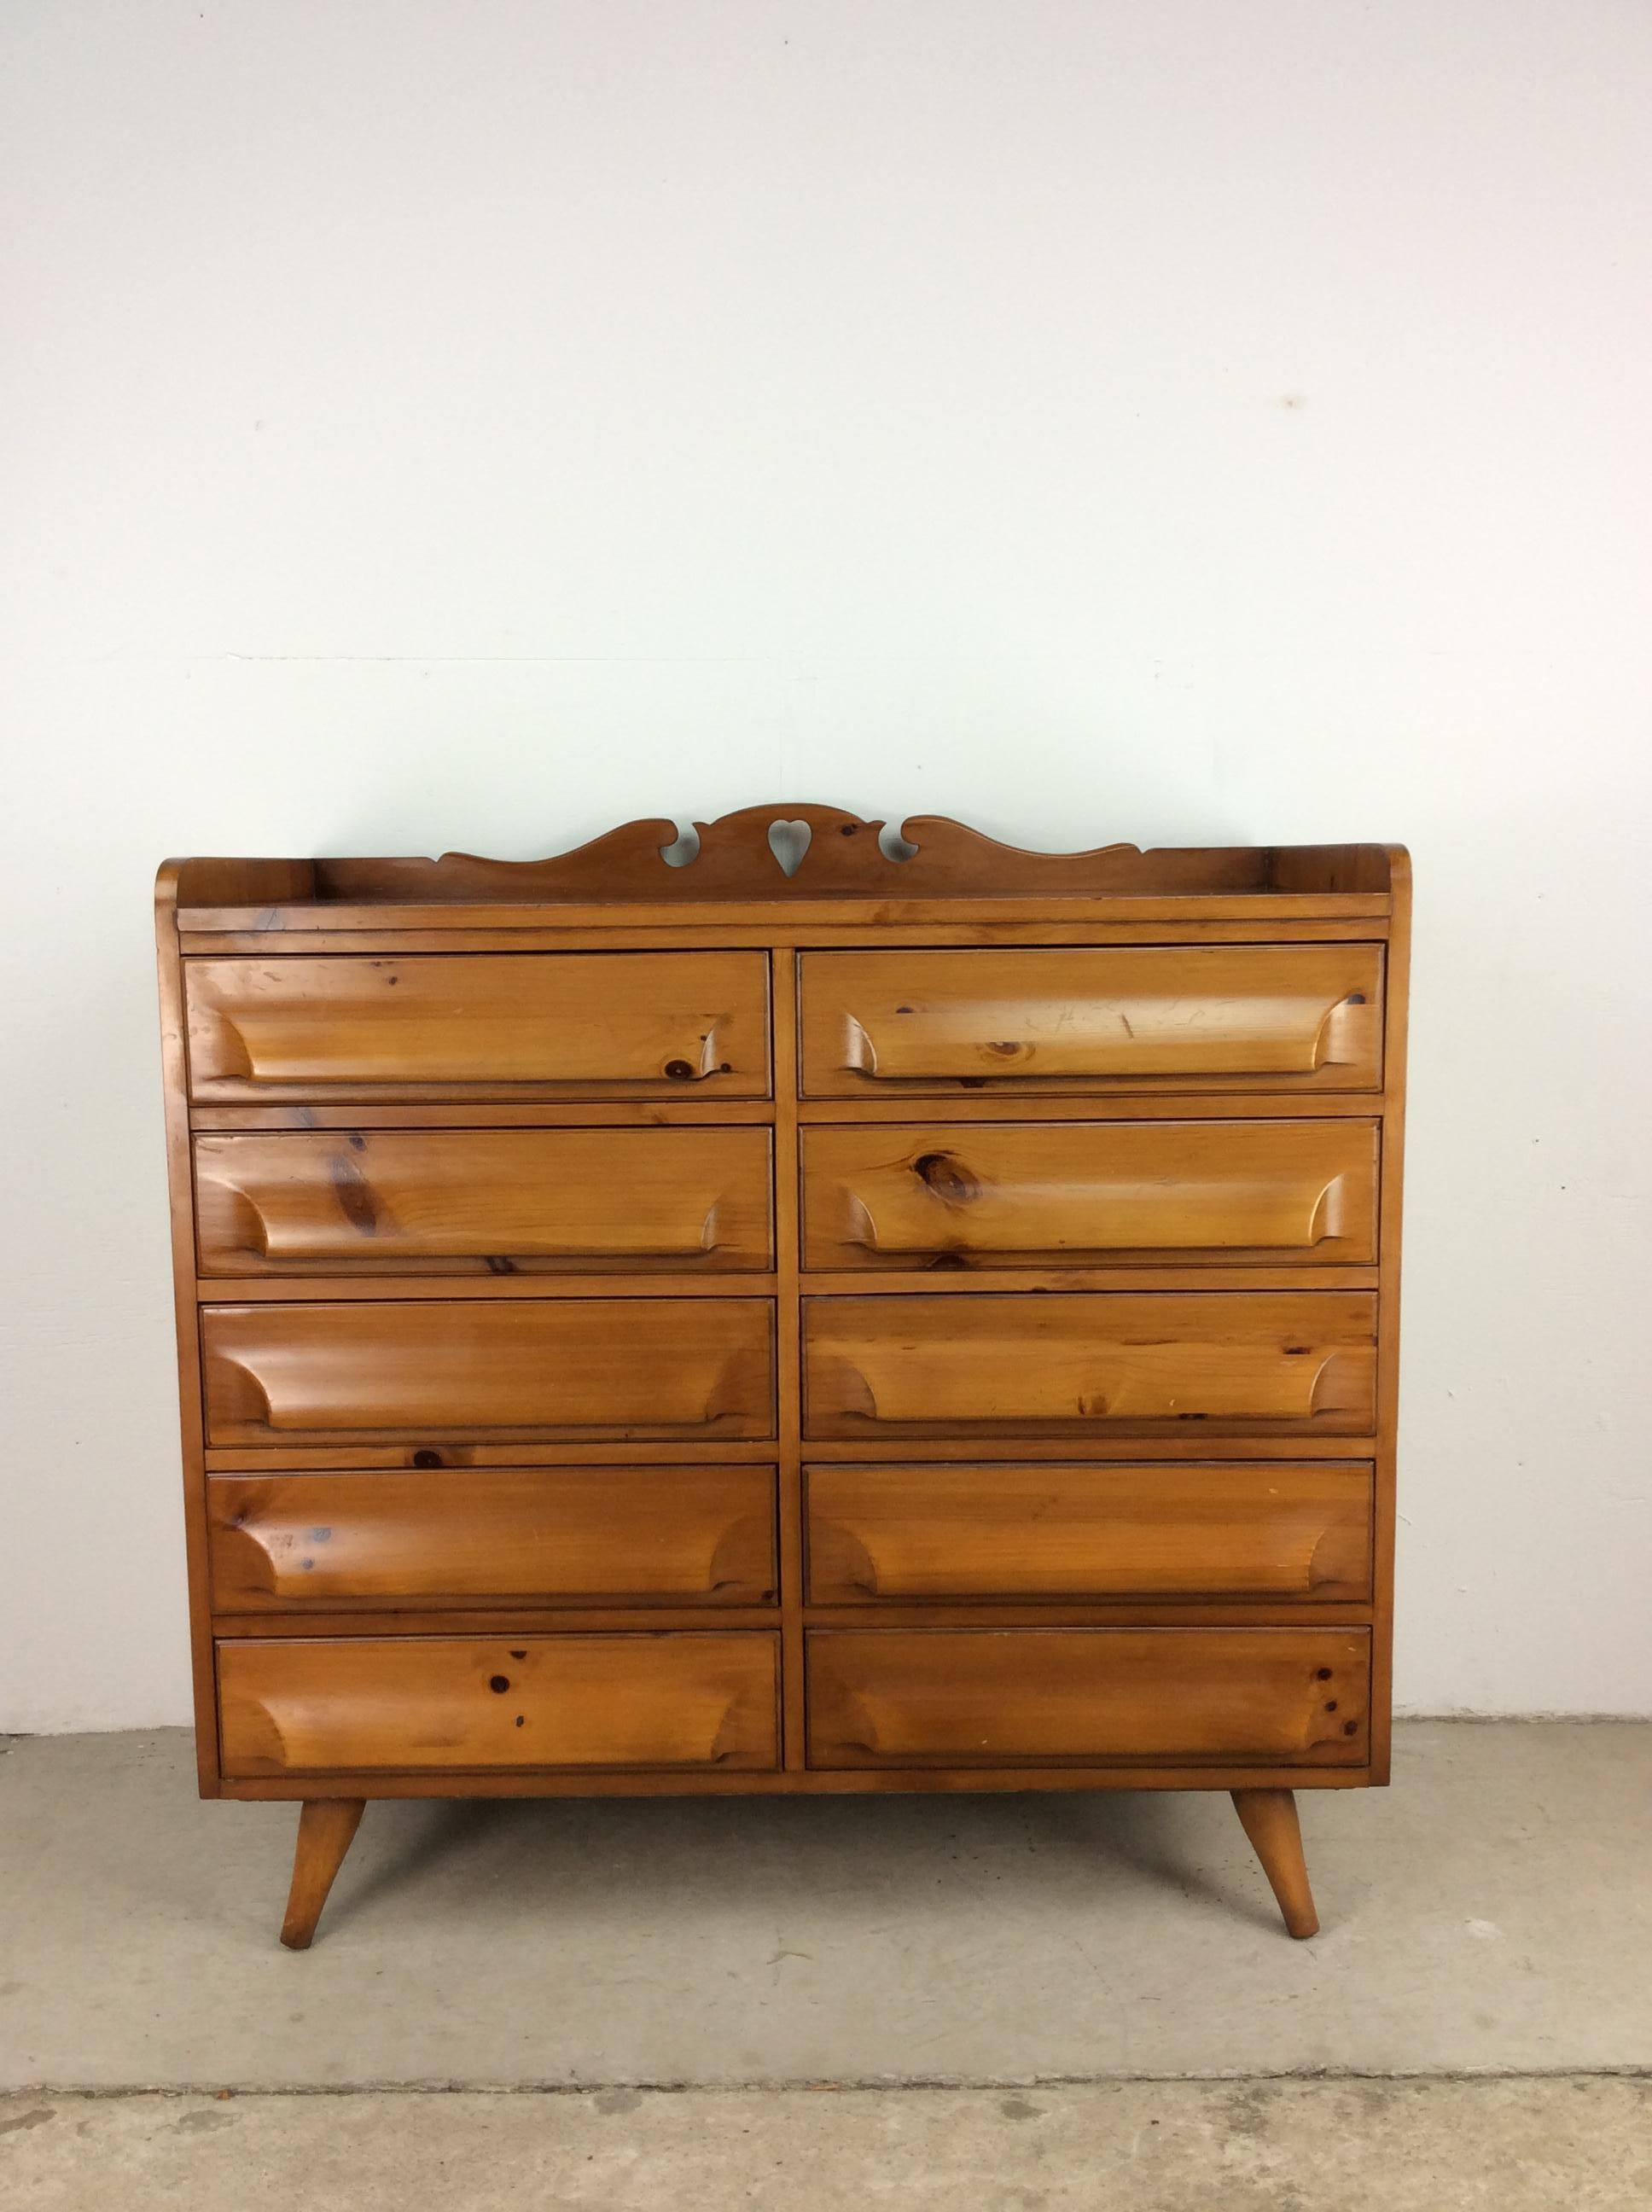 This mid century modern highboy dresser by Franklin Shockey features hardwood construction, original knotty pine finish, ten dovetailed drawers, sculpted drawer pulls, unique hard shaped carving on the back edge, and tapered legs.

Dimensions: